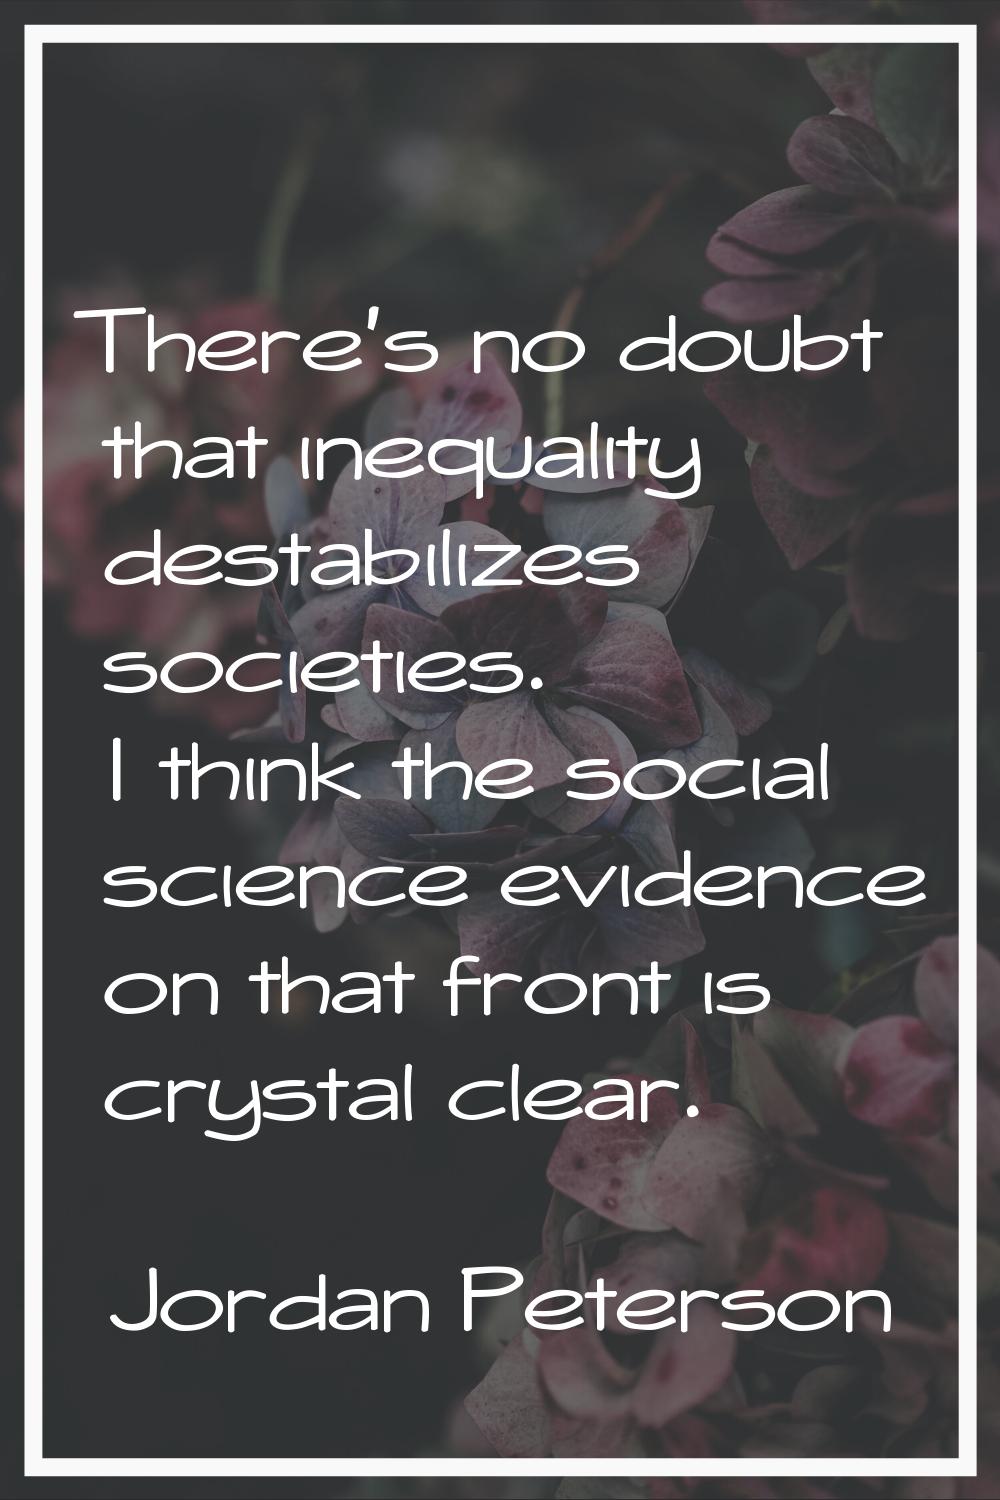 There's no doubt that inequality destabilizes societies. I think the social science evidence on tha